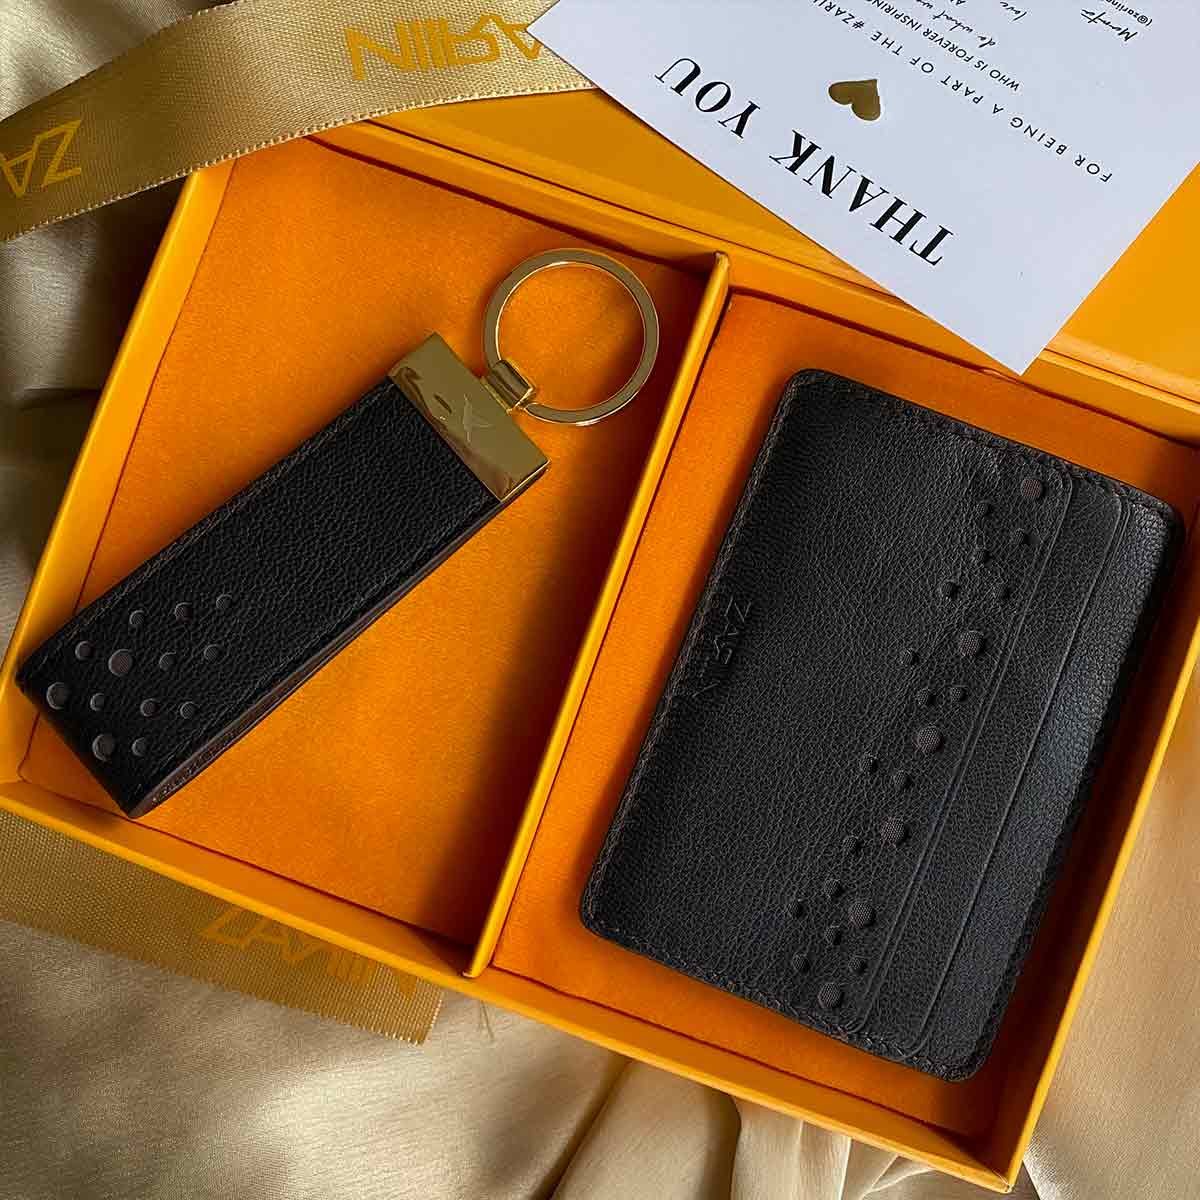 Buy Louis Vuitton Key Ring Online In India -  India